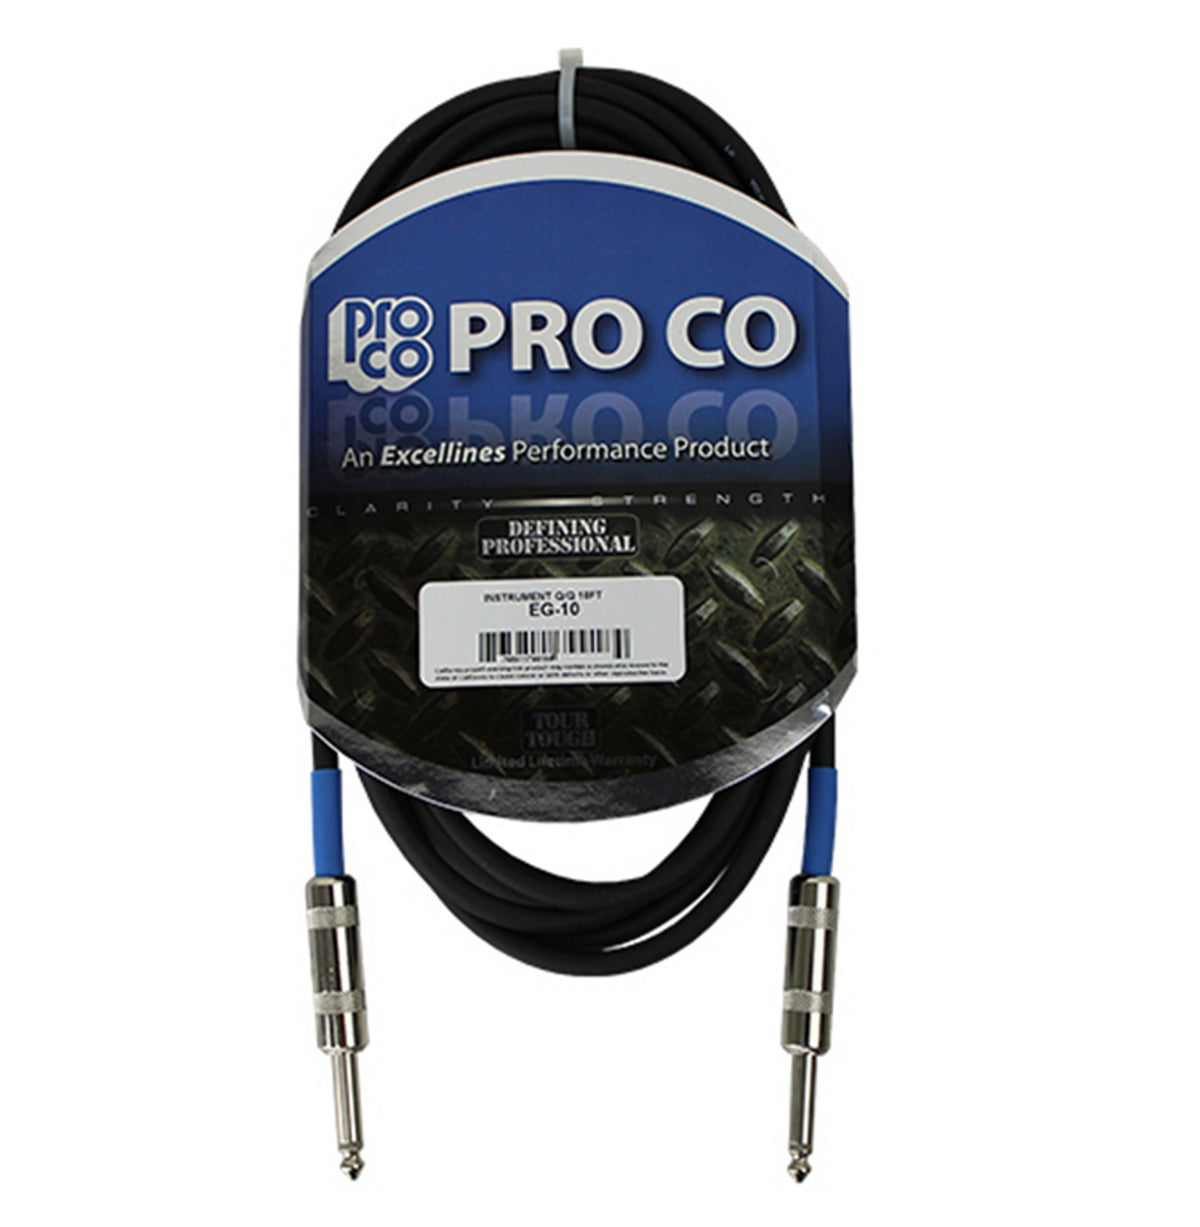 Pro Co EG-186 18.5' Excellines 1/4" Instrument Cable